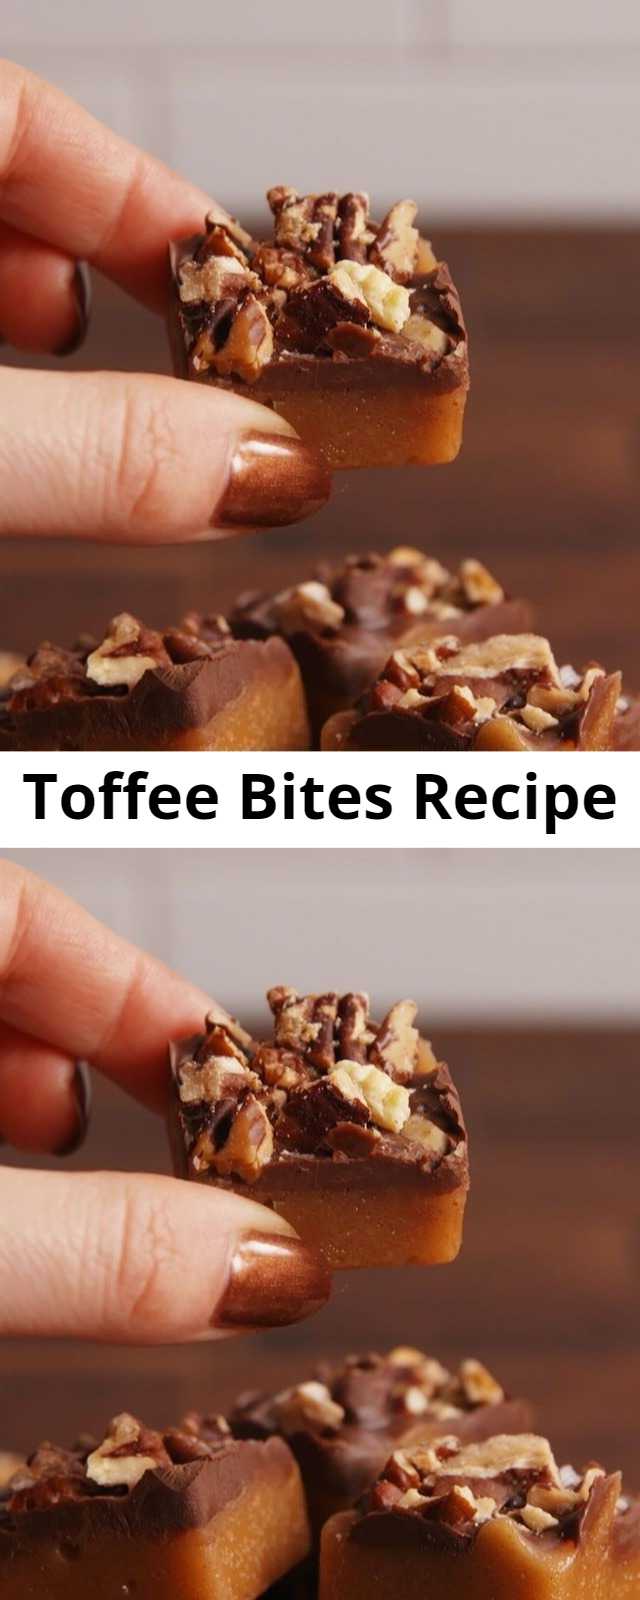 Toffee Bites Recipe - Individual Toffee Bites are perfect for sharing. #food #easyrecipe #recipe #gifts #holiday #christmas #pastryporn #kids #ideas #hacks